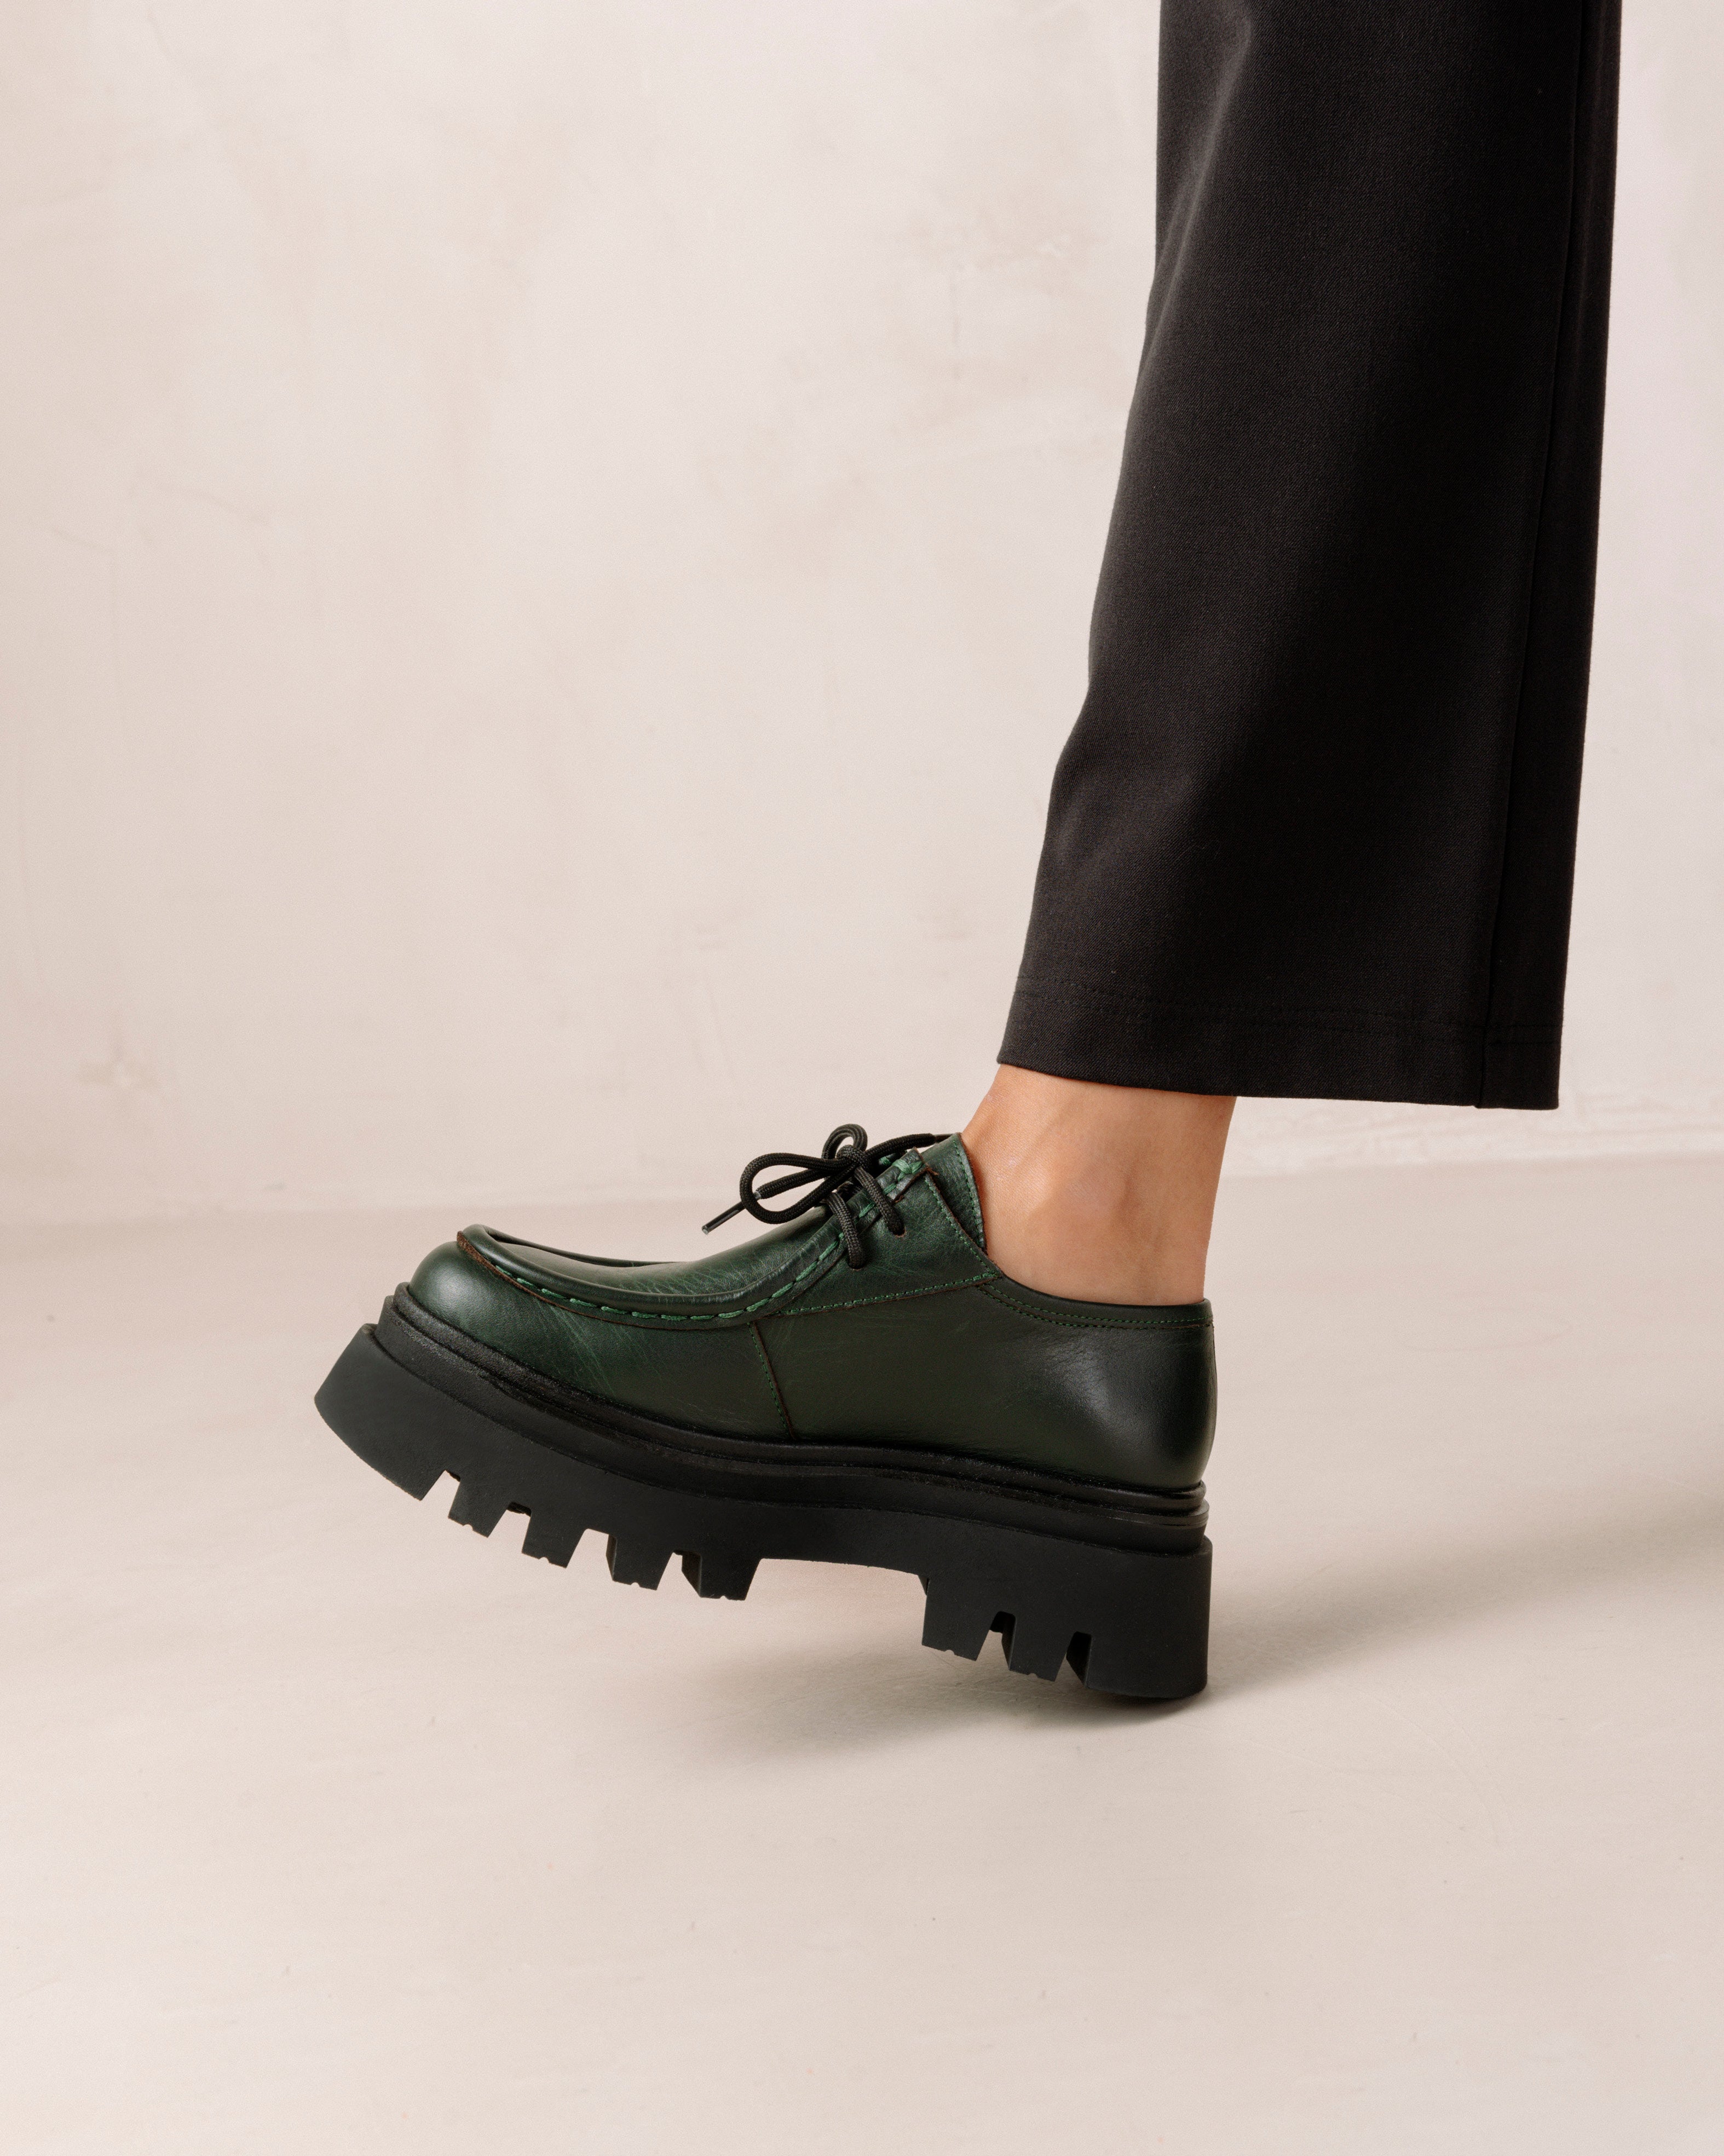 tycoon-jade-green-leather-loafers-loafers-alohas-822799_00480e3b-707e-444f-ab92-3be1c464d63f.jpg